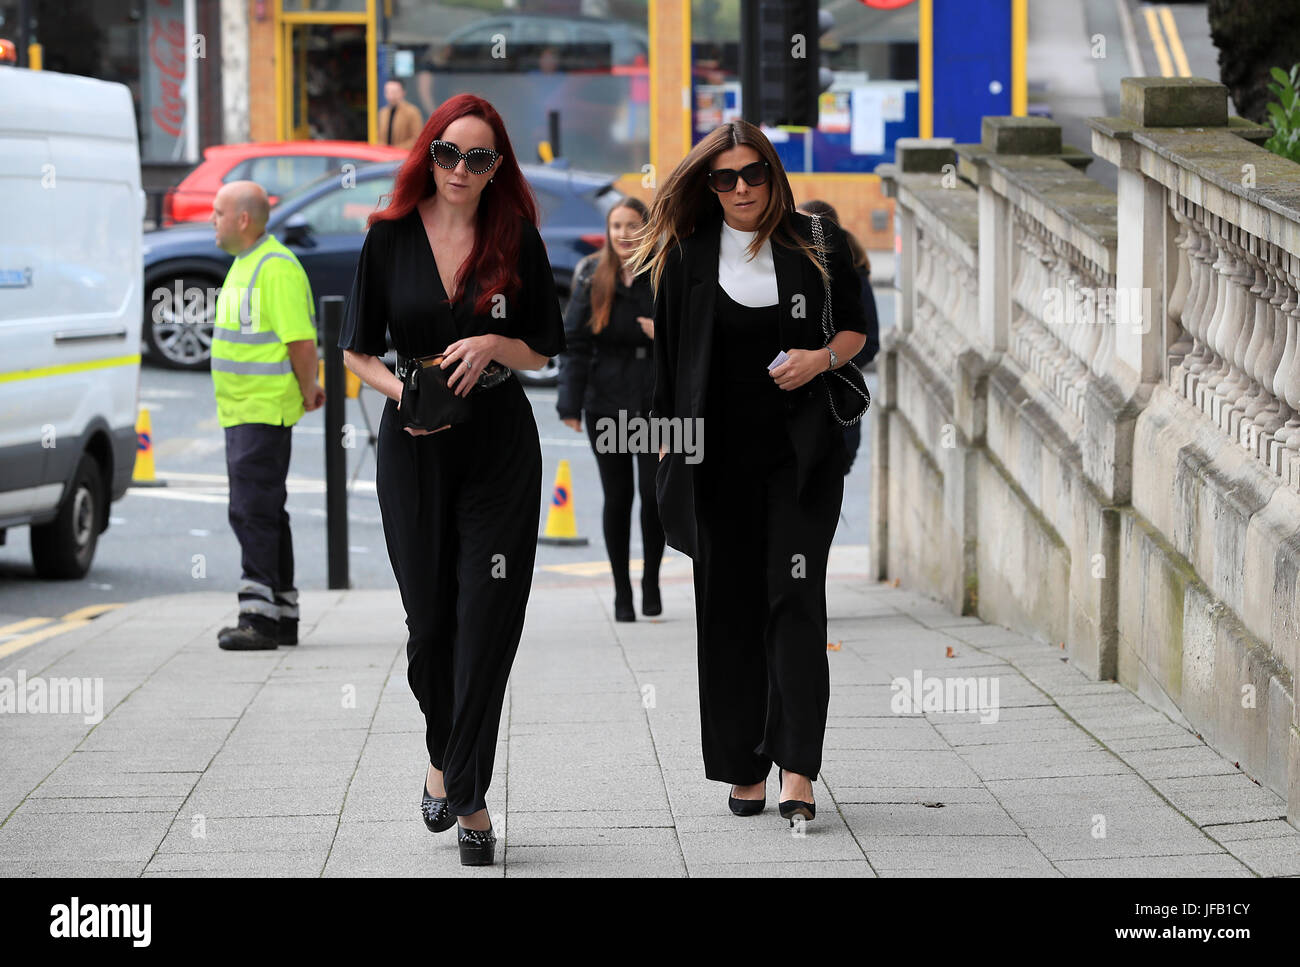 Kym Marsh and Kate Oates (left) arrives at the funeral service of Martyn Hett, who was killed in the Manchester Arena bombing, at Stockport Town Hall Plaza. Stock Photo